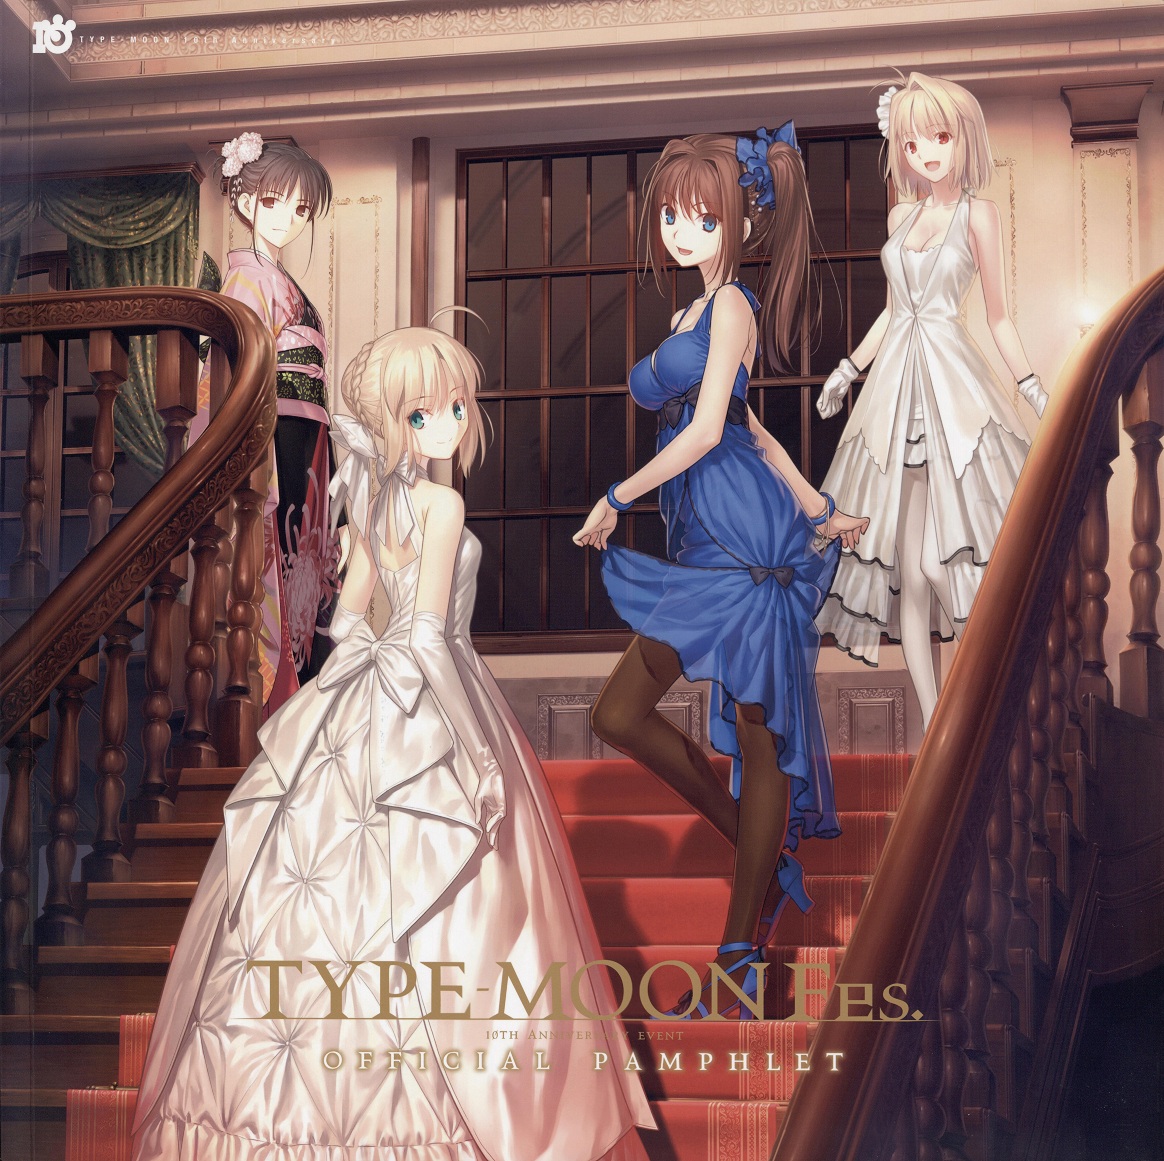 TYPE-MOON Fes. Official Pamphlet | TYPE-MOON Wiki | Fandom